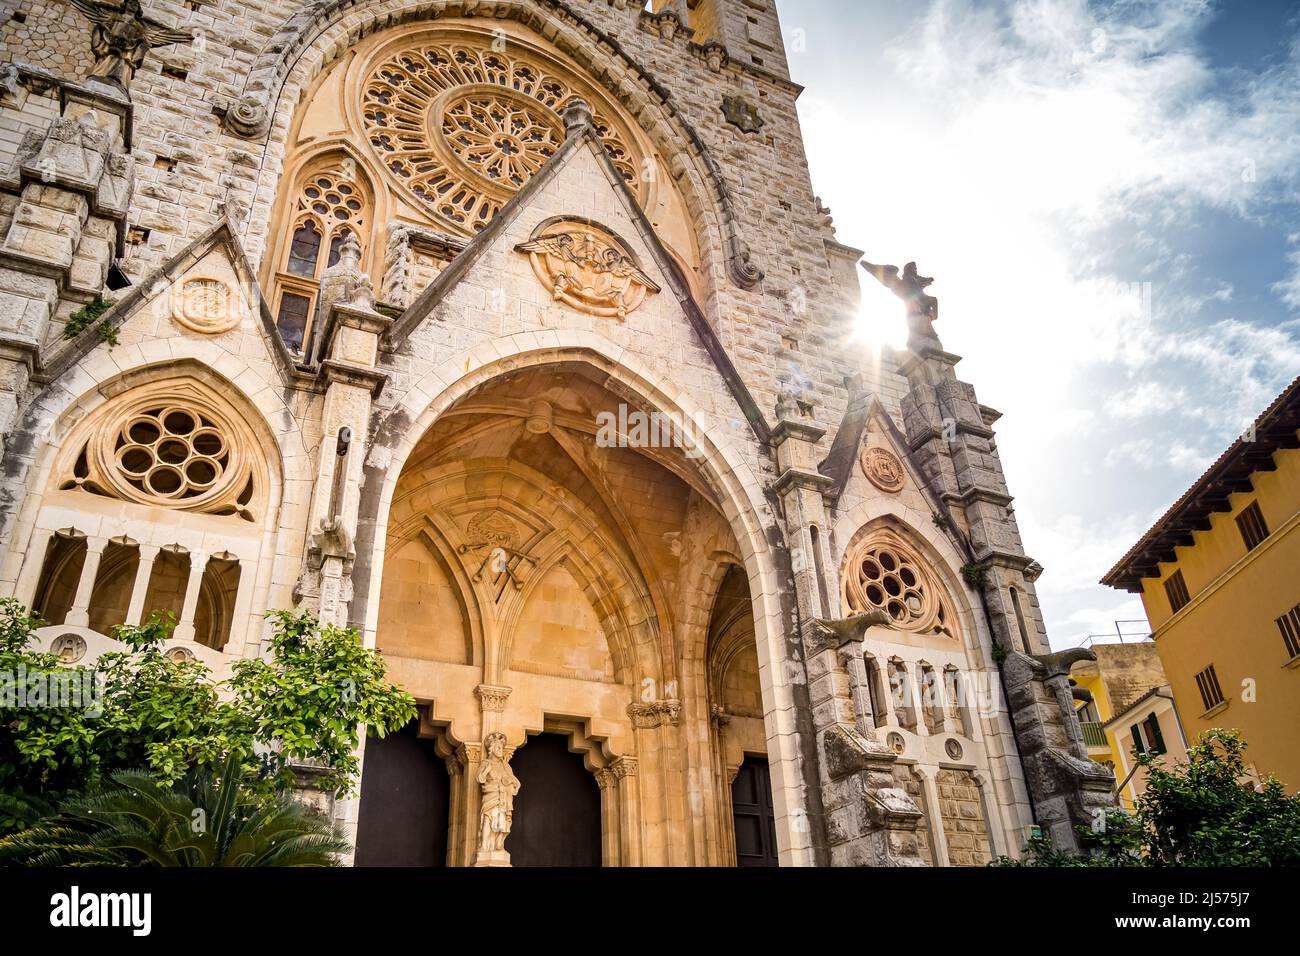 Backlit shot of gothic revival front facade of Sant Bartomeu Church in Soller with rose window ornaments and mighty entry. Popular tourist attraction. Stock Photo